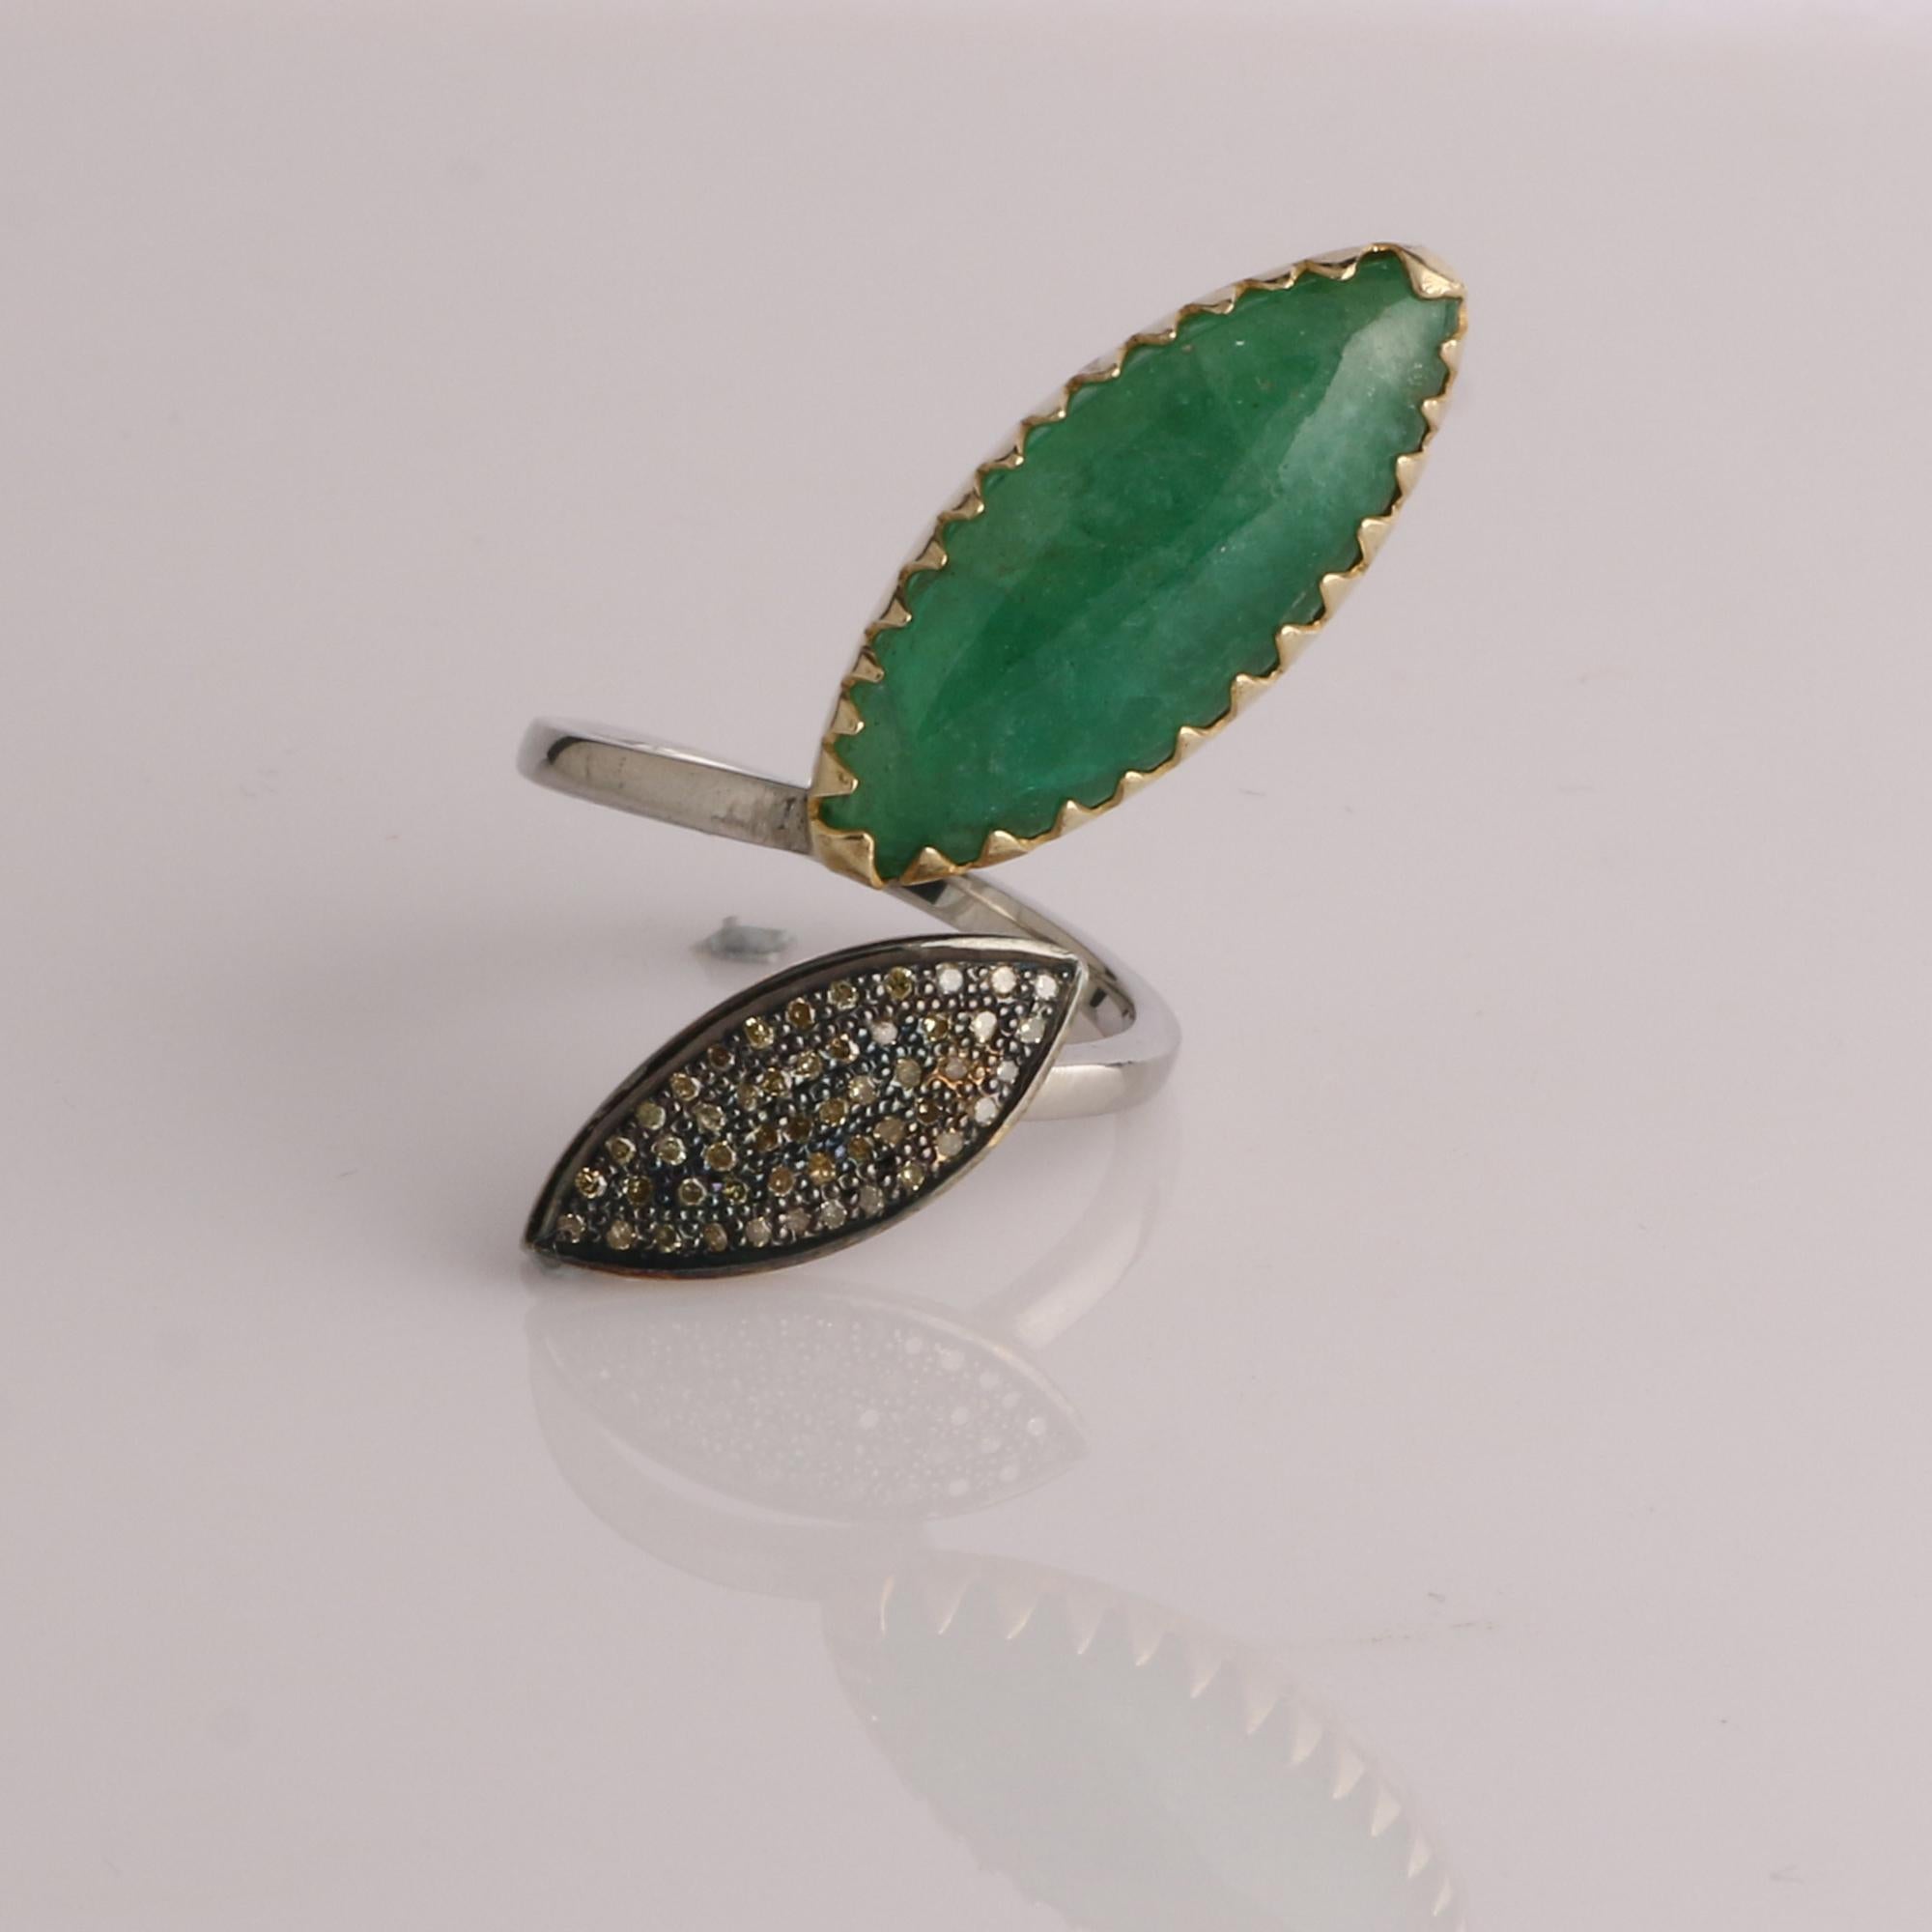 Item details:-

✦ SKU:- ESRG00215

✦ Material :- 925 Sterling Silver
✦ Gemstone Specification:-
✧ Diamond
✧ Emerald

✦ Approx. Diamond Weight : 0.25
✦ Approx. Silver Weight : 4.9
✦ Approx. Gross Weight : 6.5

Ring Size (US): 9

You will Get the same